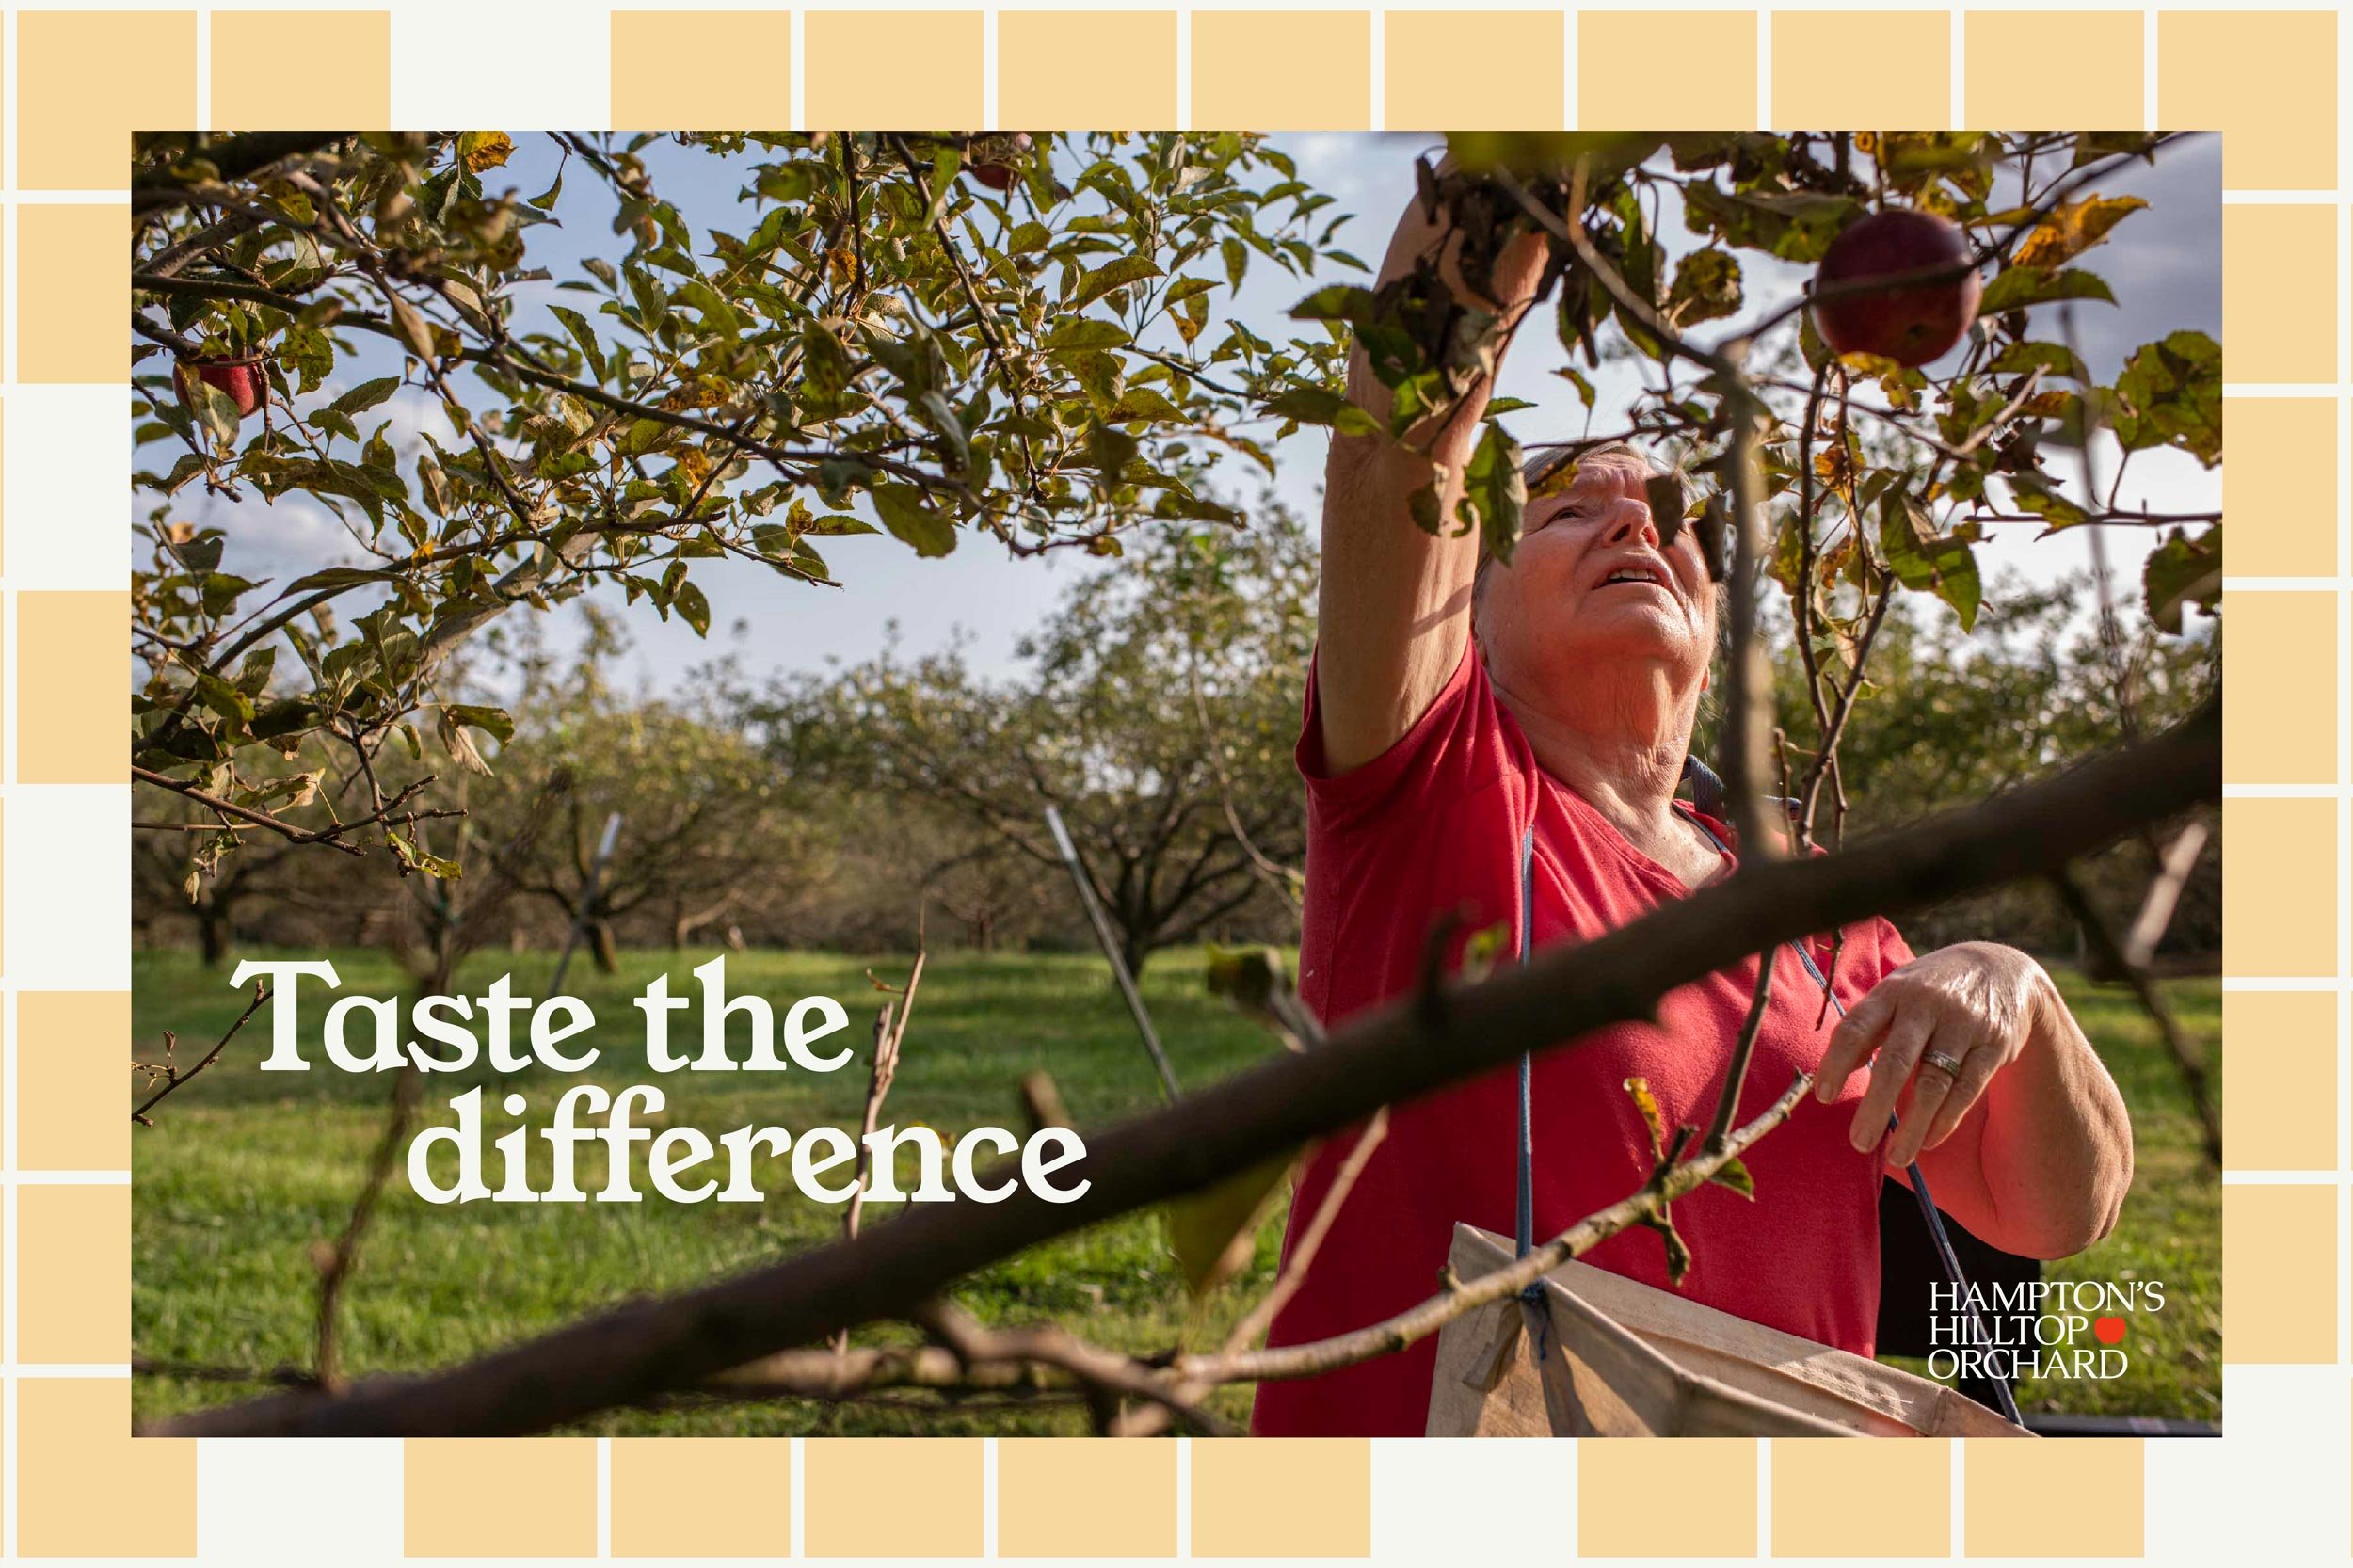  Photo of a woman picking apples with text “taste the difference.” 